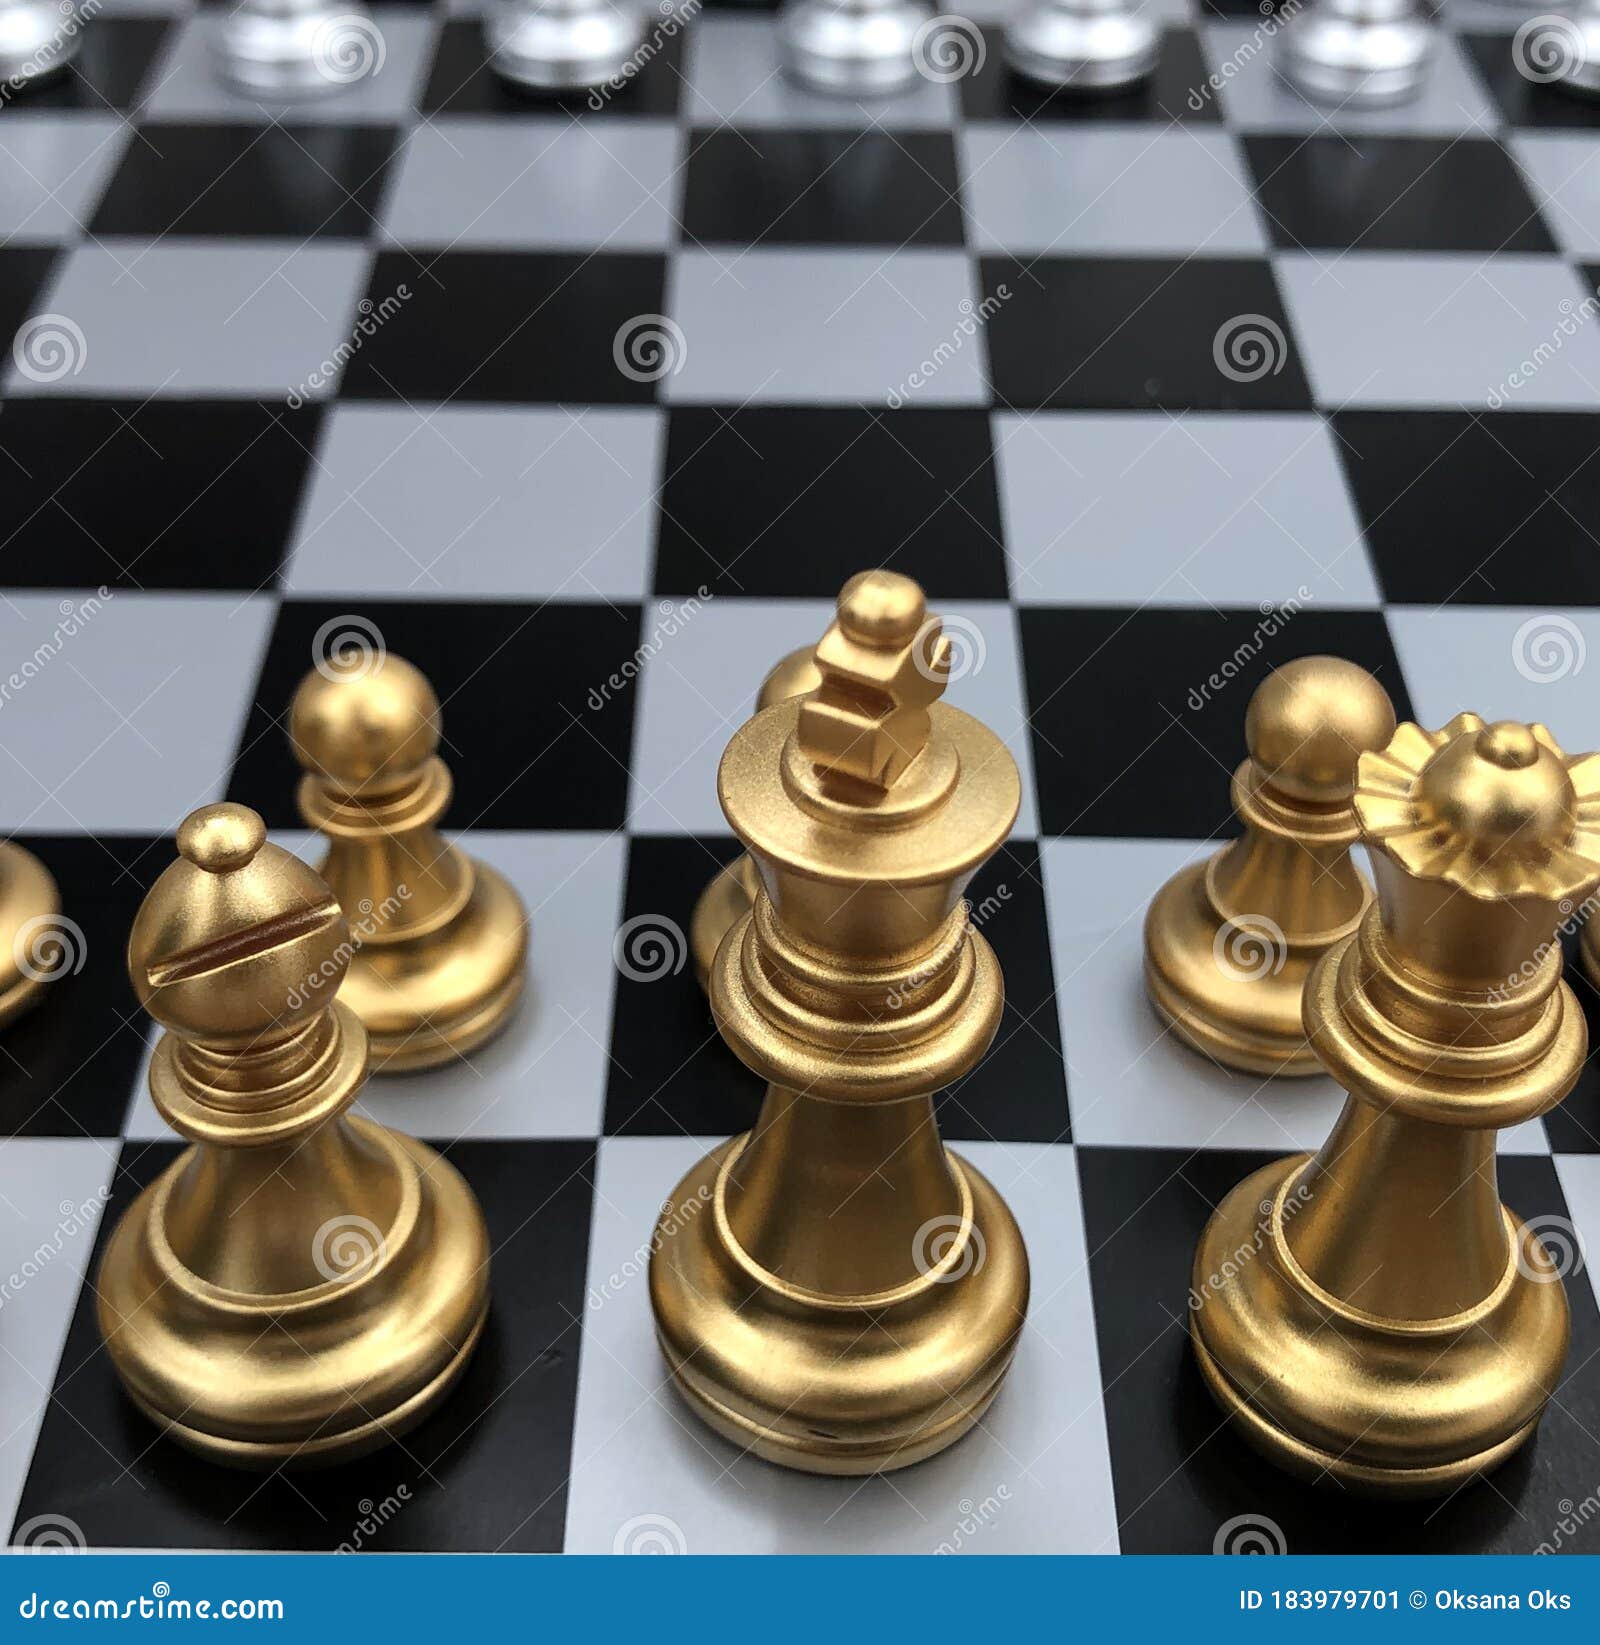 chess game board with figures